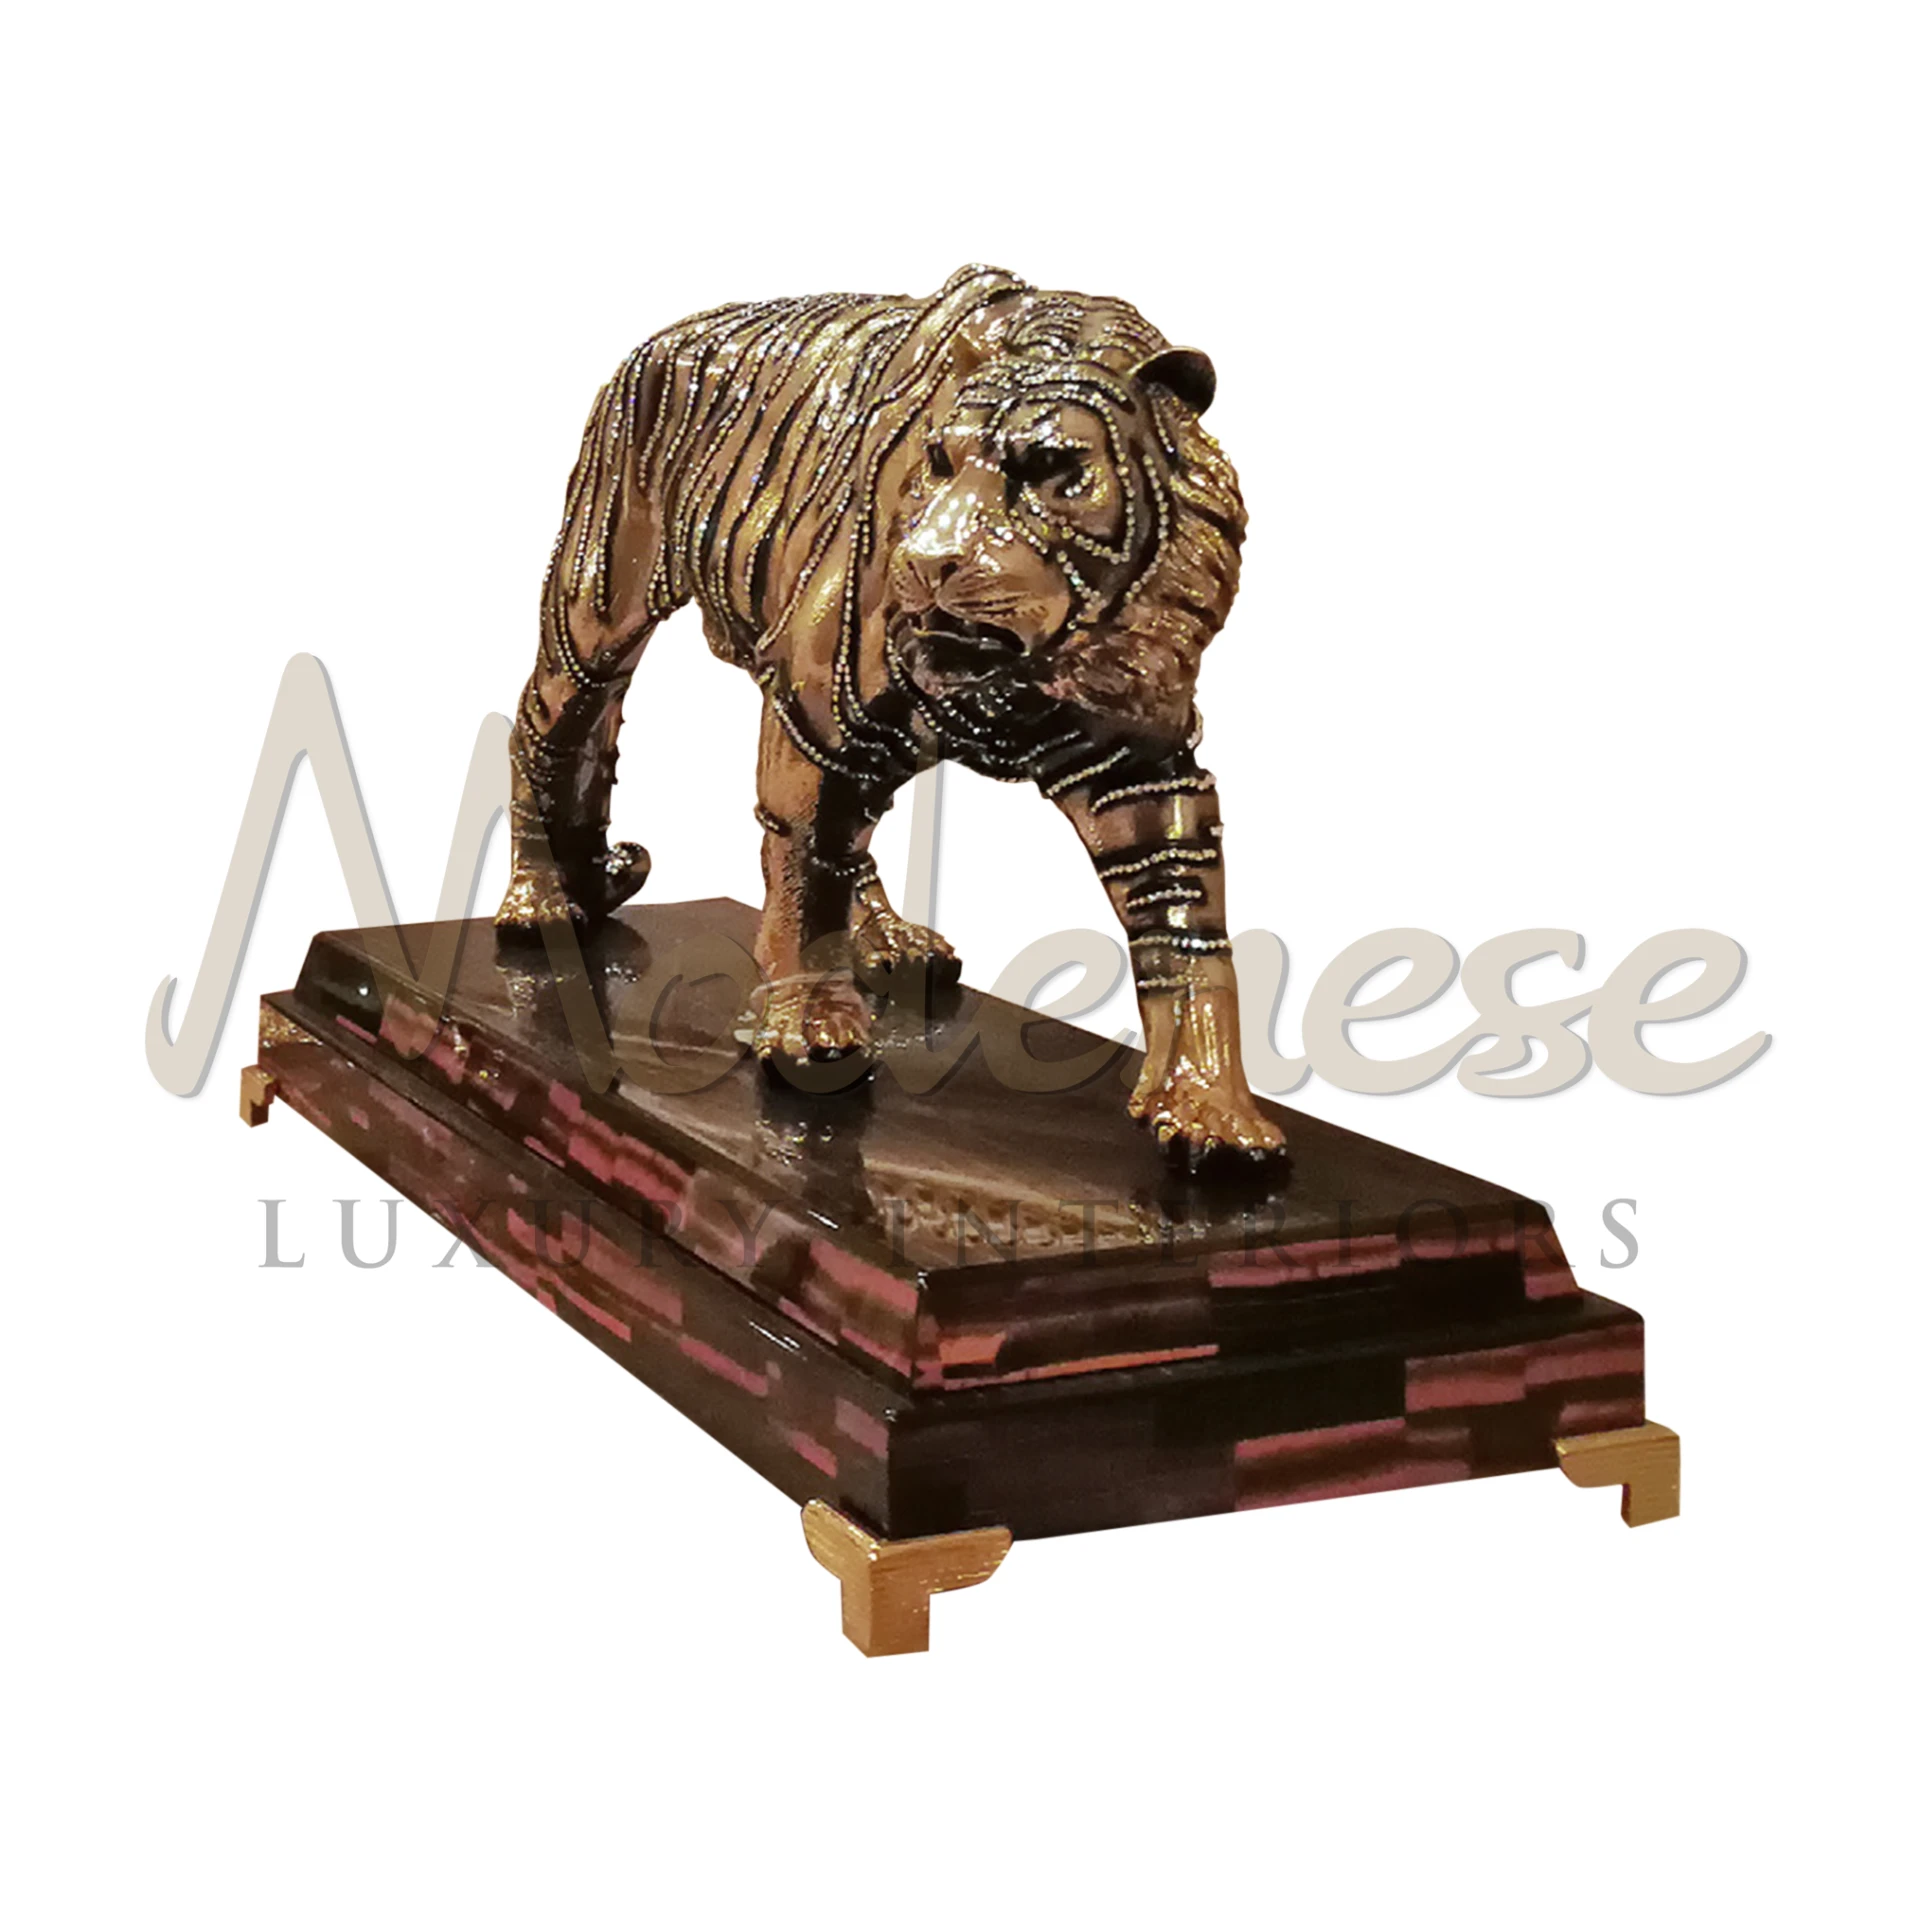 Imperial Tiger statue in striking detail, a centerpiece of elegance and natural power, enhancing the sophistication of any luxury home interior.